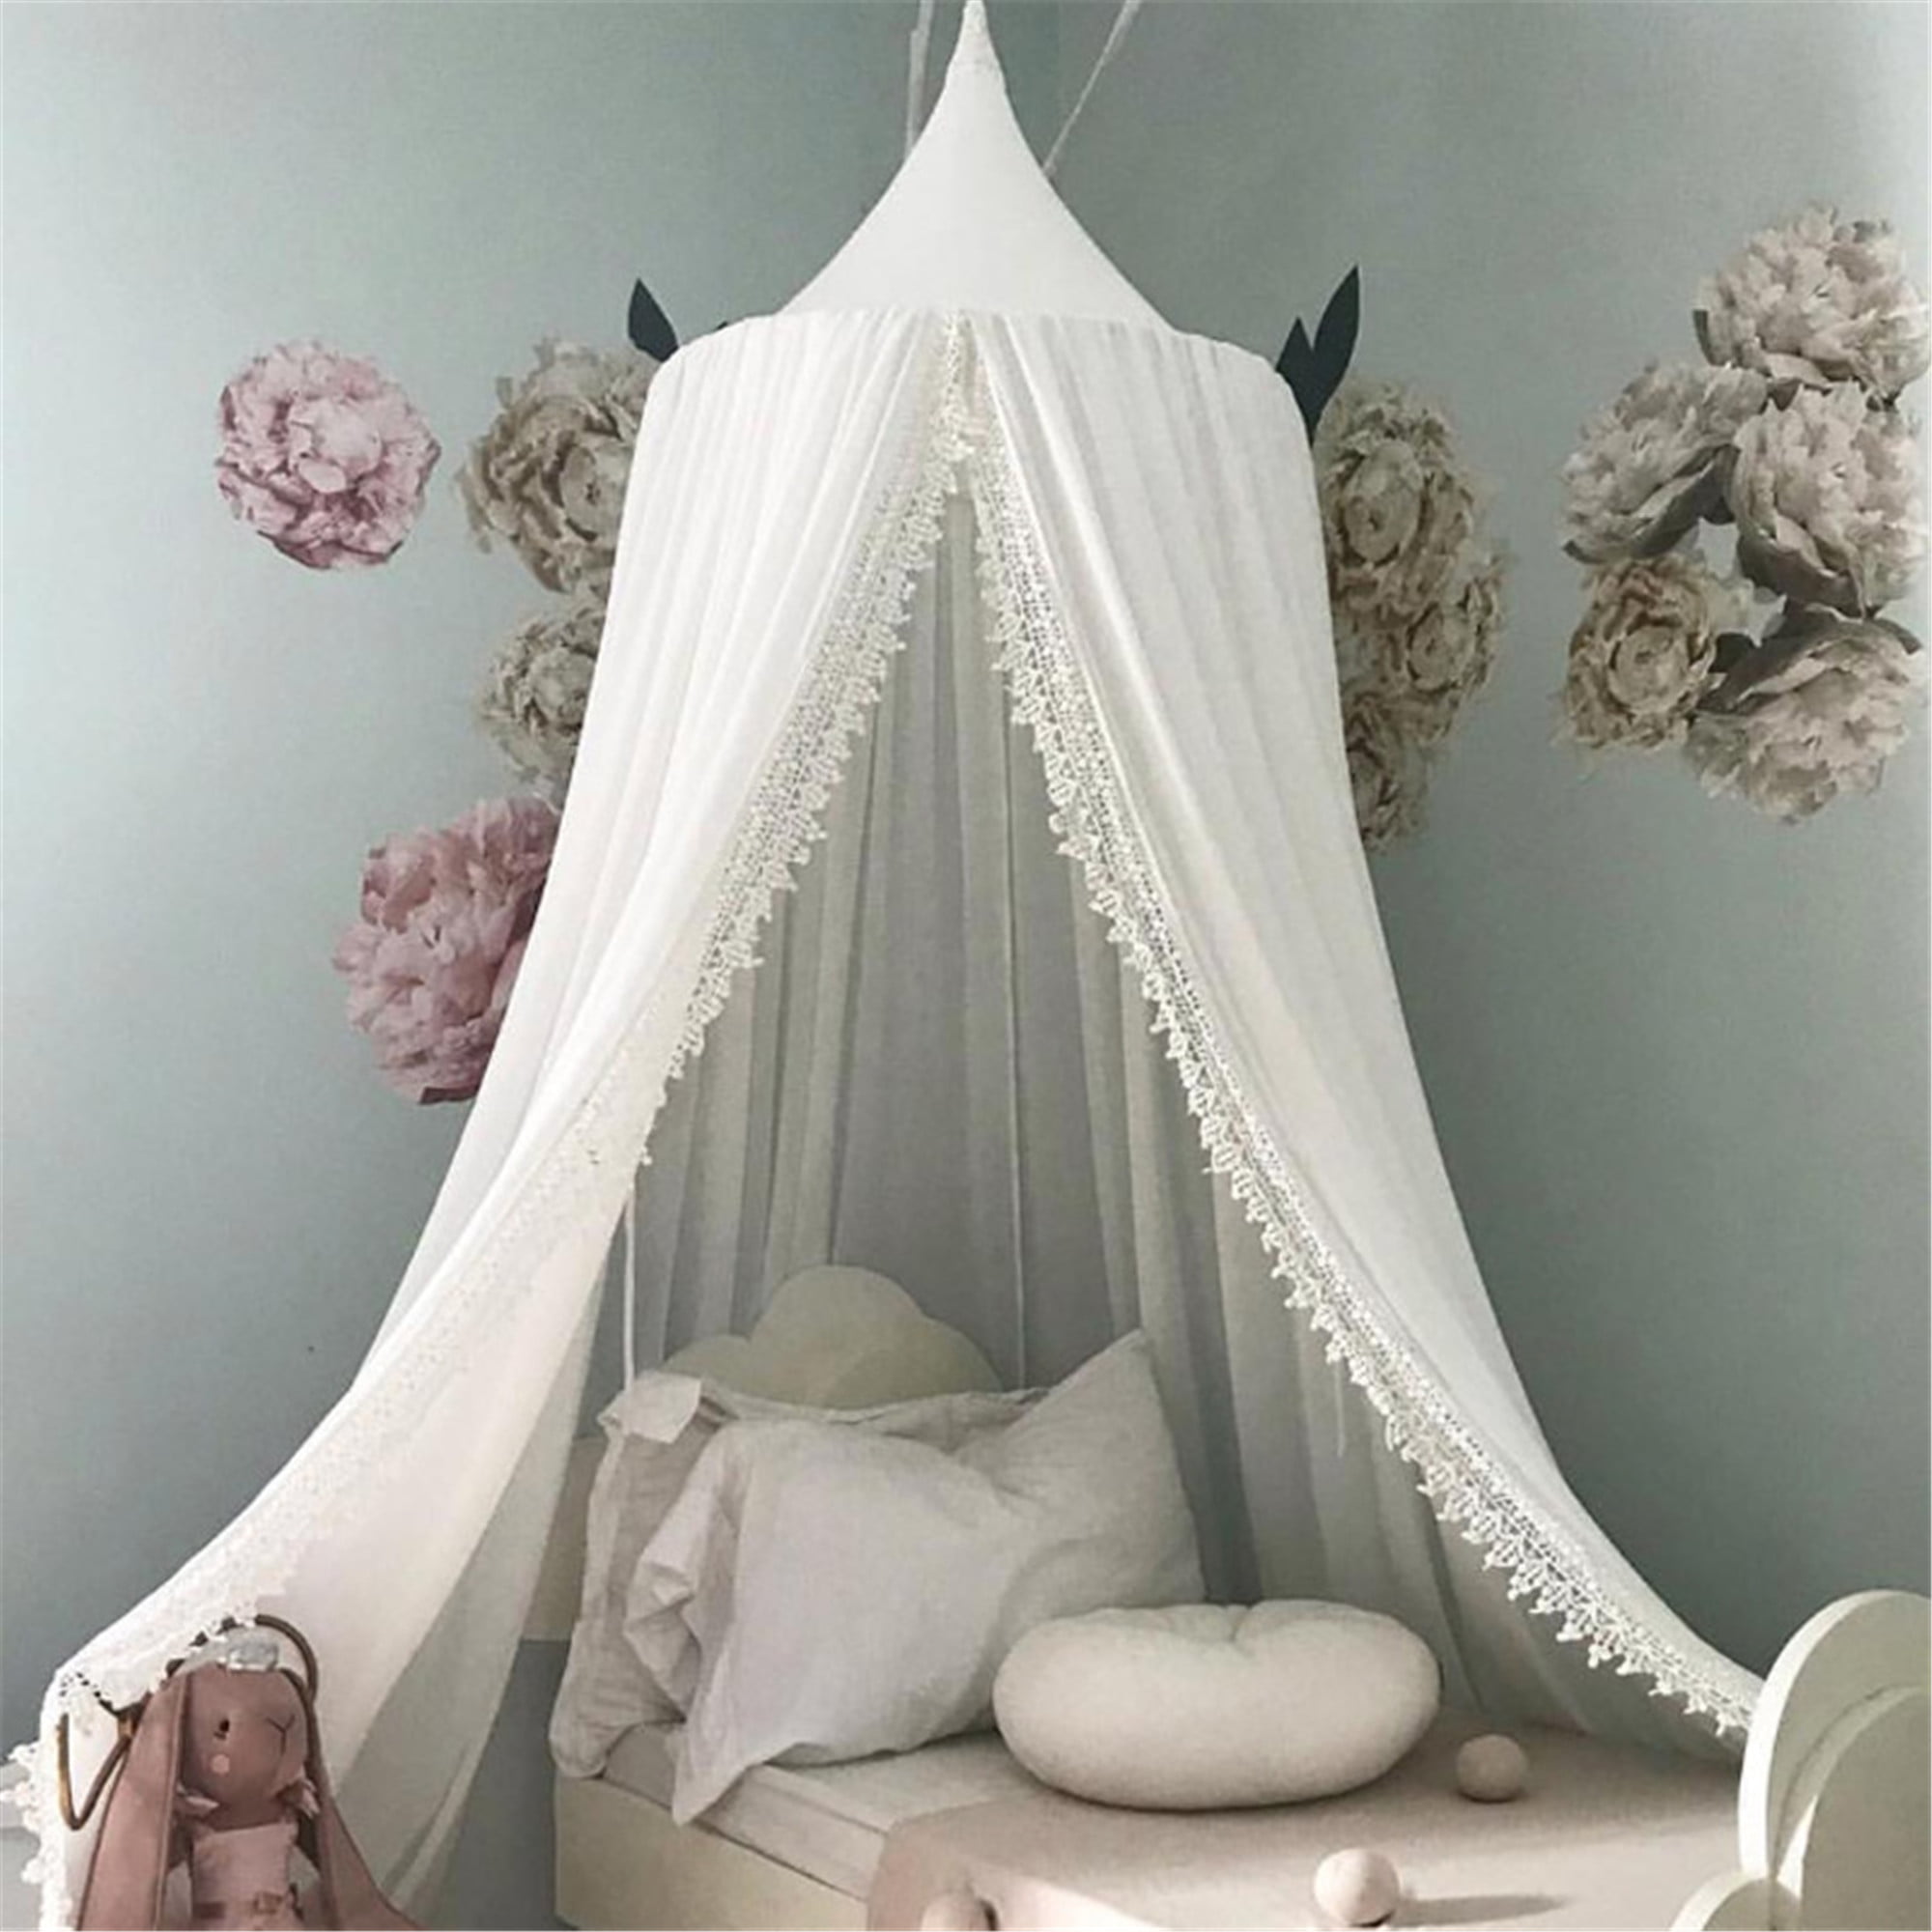 Lace Princess Dome Mosquito Net Mesh Bed Canopy Tent Bedroom Home Decor. 